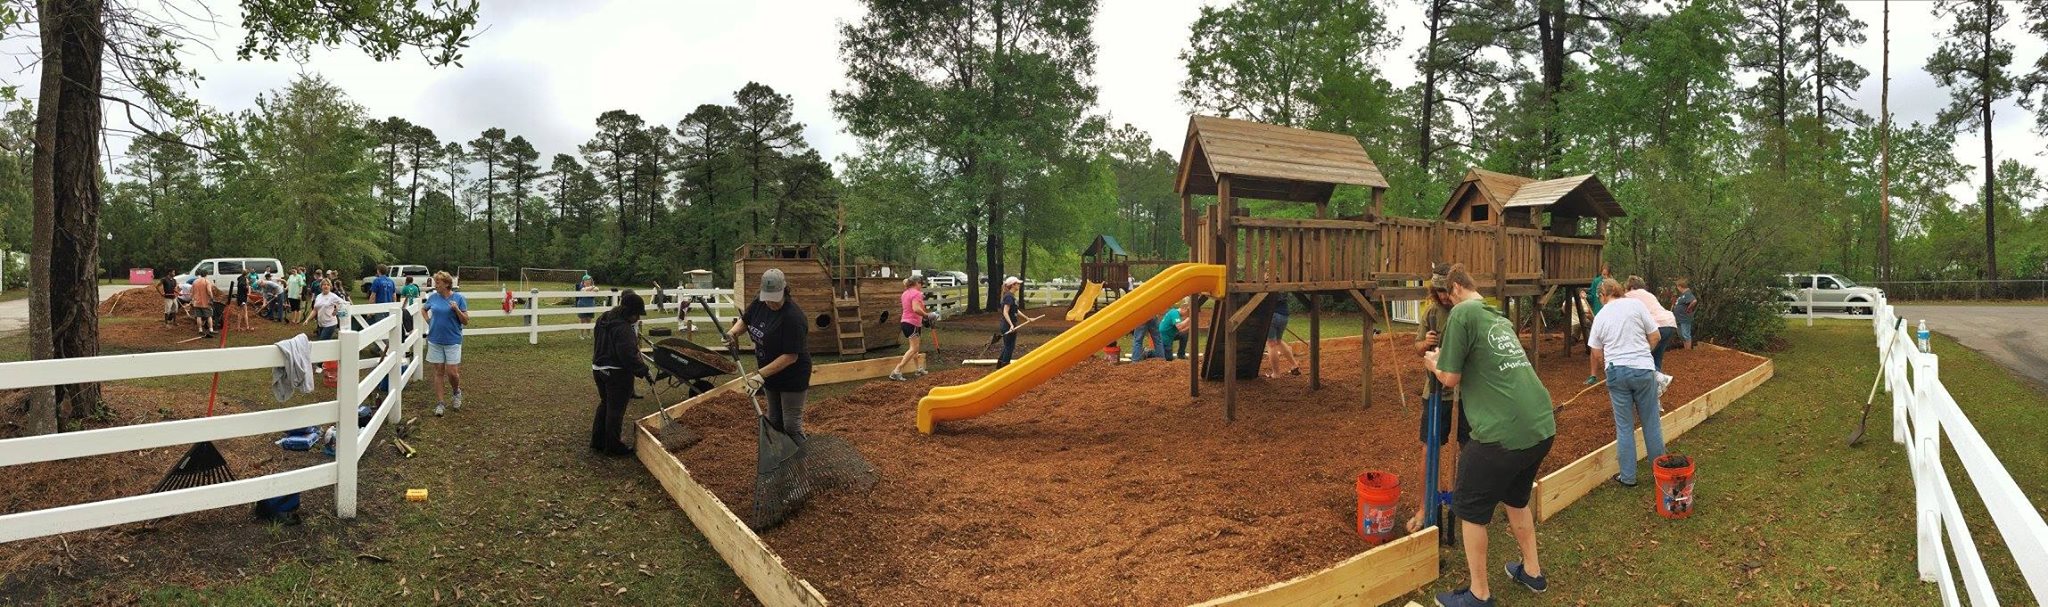 Volunteers from Little Guys and across the city take the opportunity to Work With Wilmington and revive a community playground.